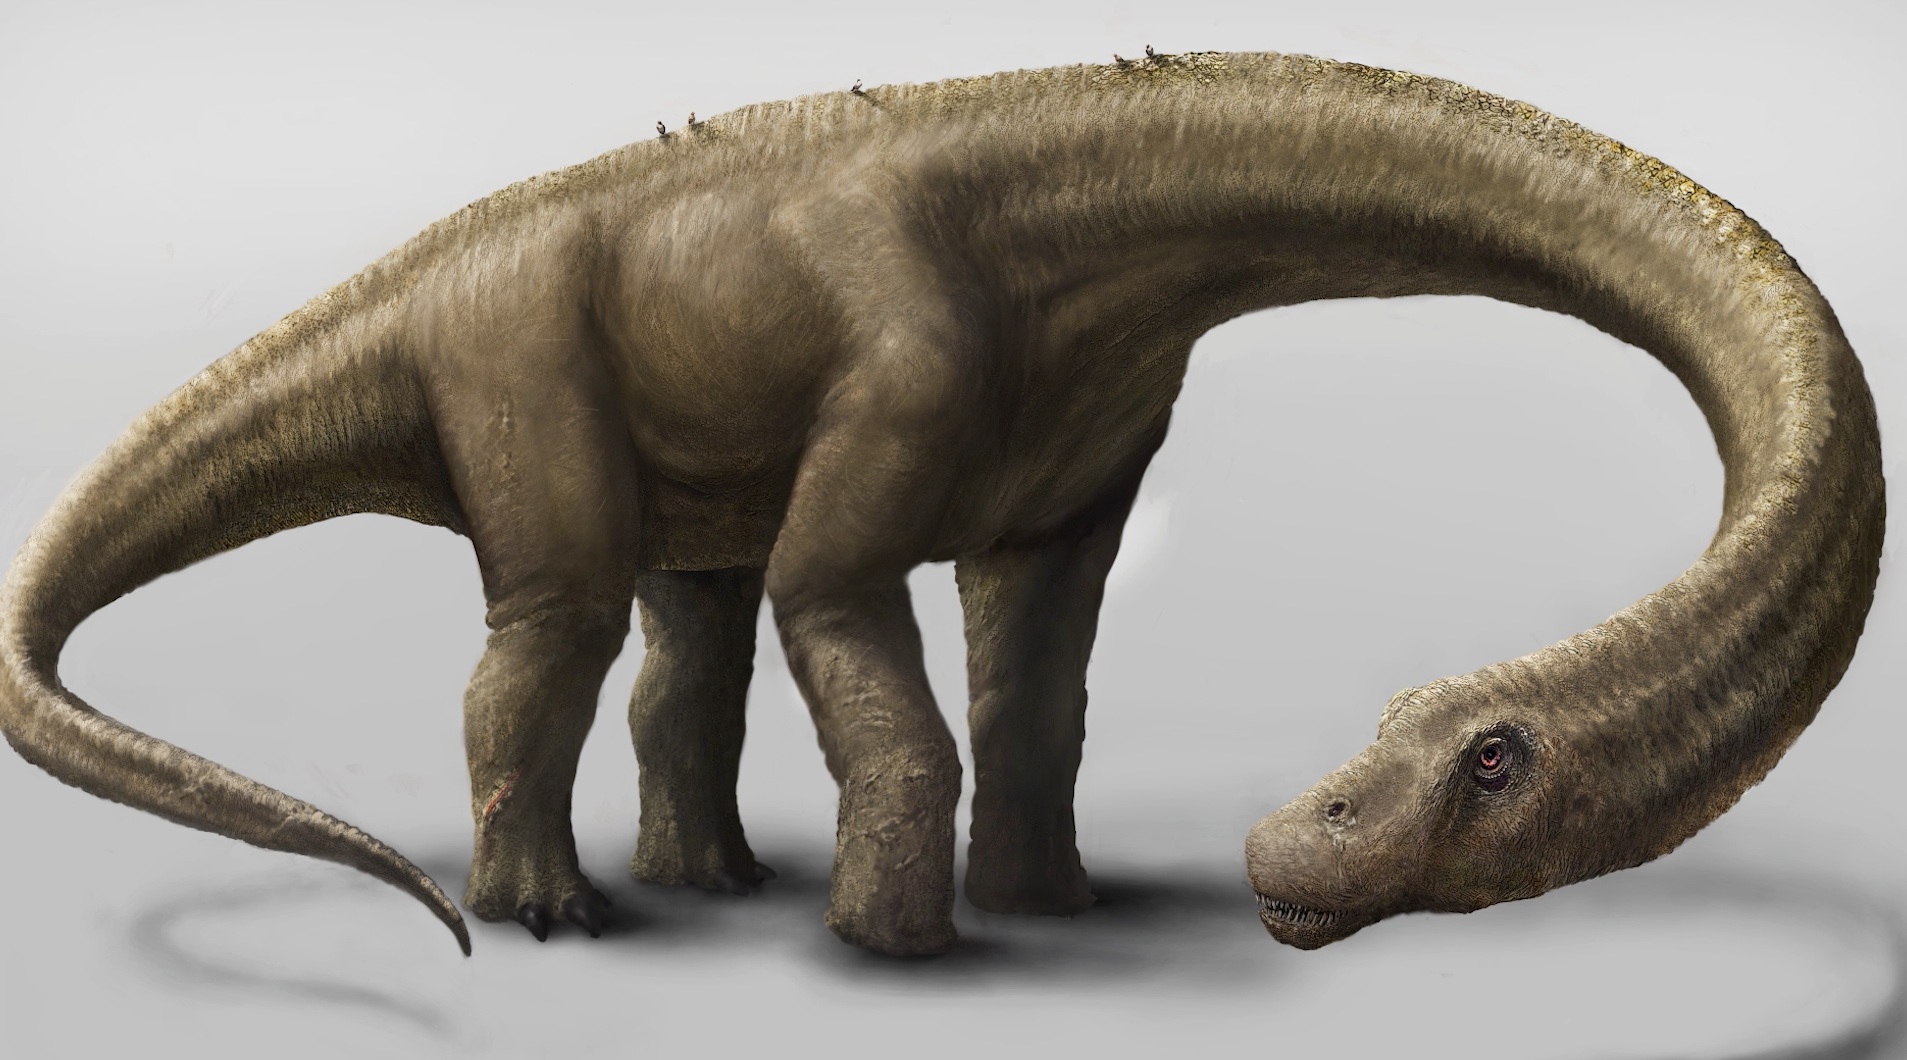 Newly discovered dinosaur, Dreadnoughtus, takes title of largest  terrestrial animal - The Washington Post